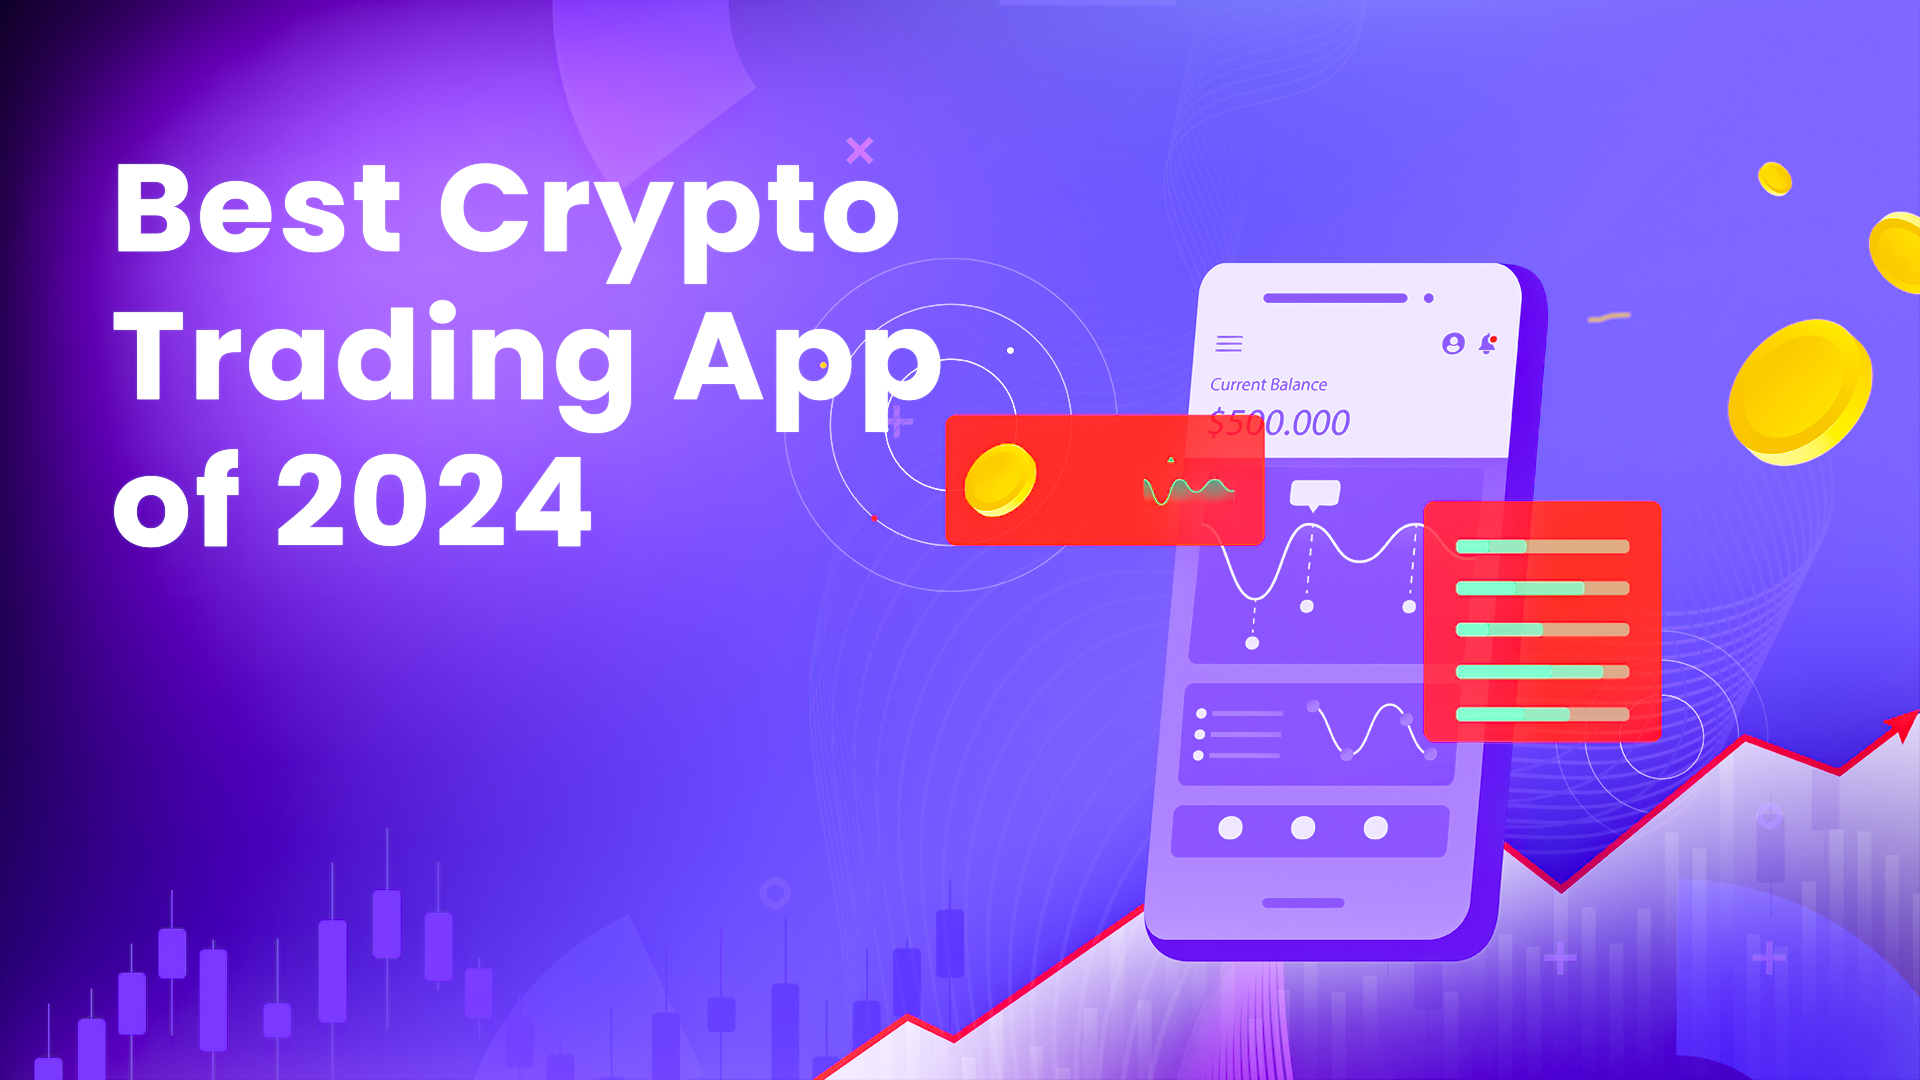 The Complete Investor Guide: The Finest Crypto Trading App of 2024